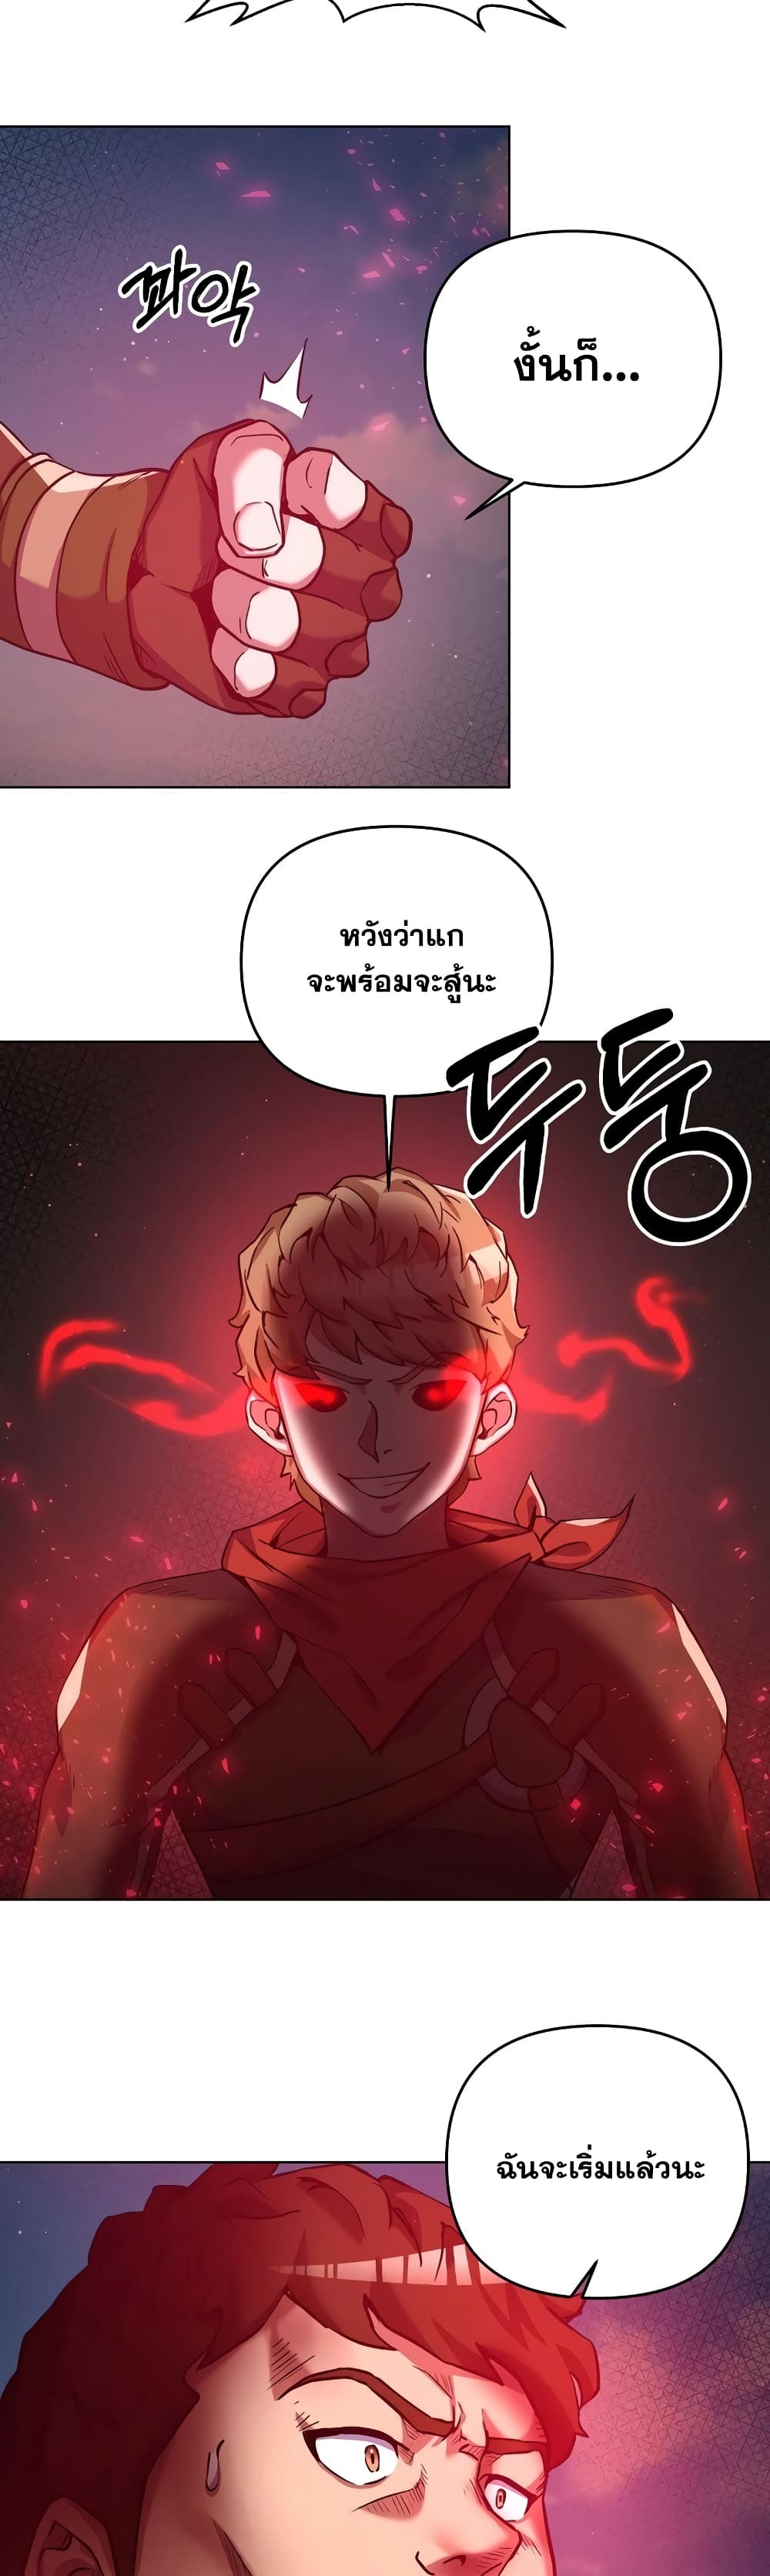 Surviving in an Action Manhwa 1-1